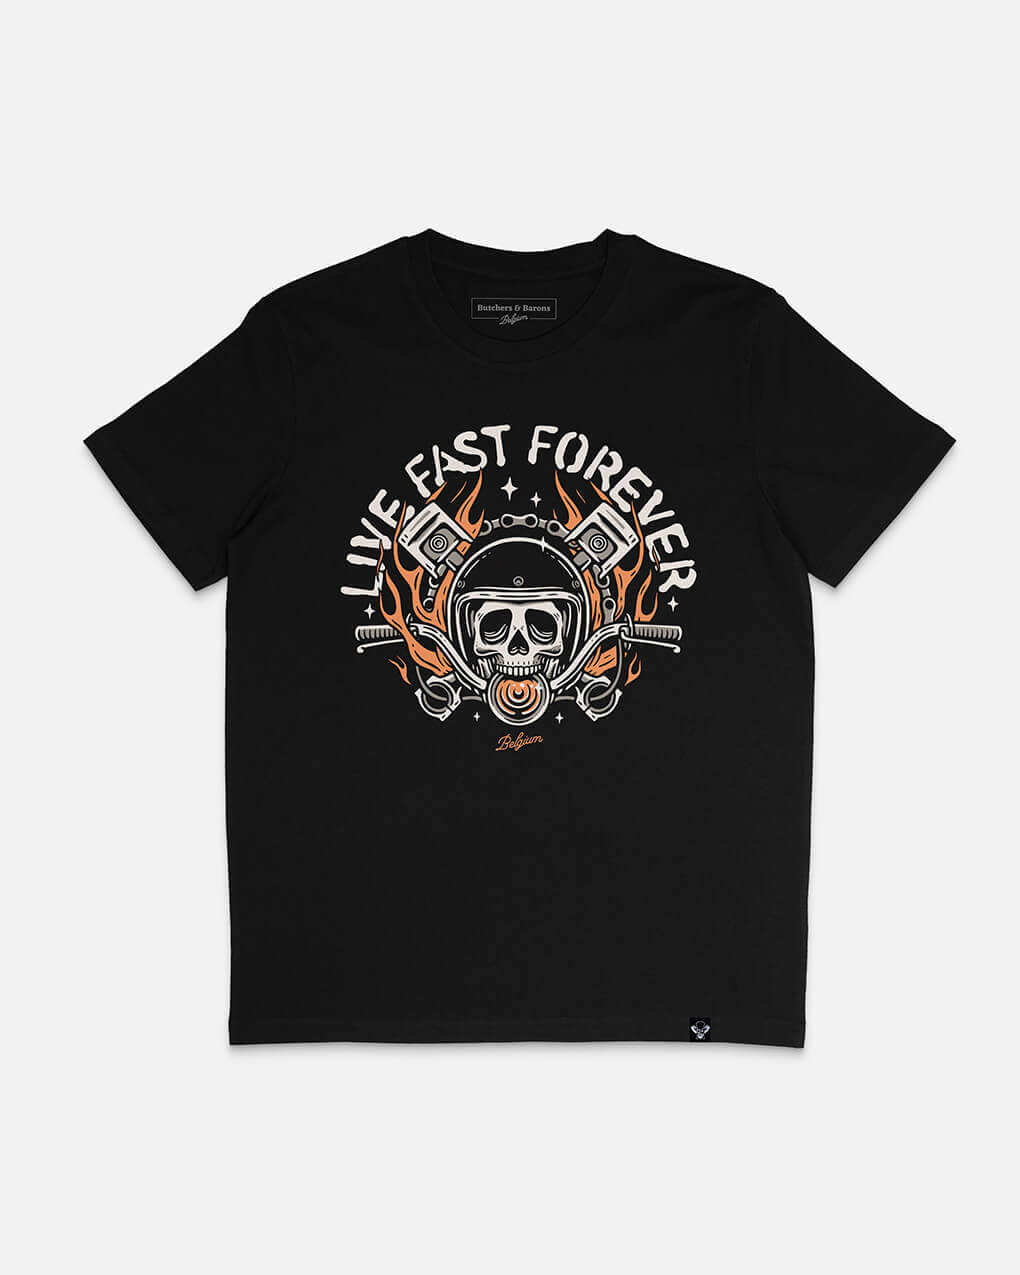 Live Fast t-shirt by Butchers & Barons